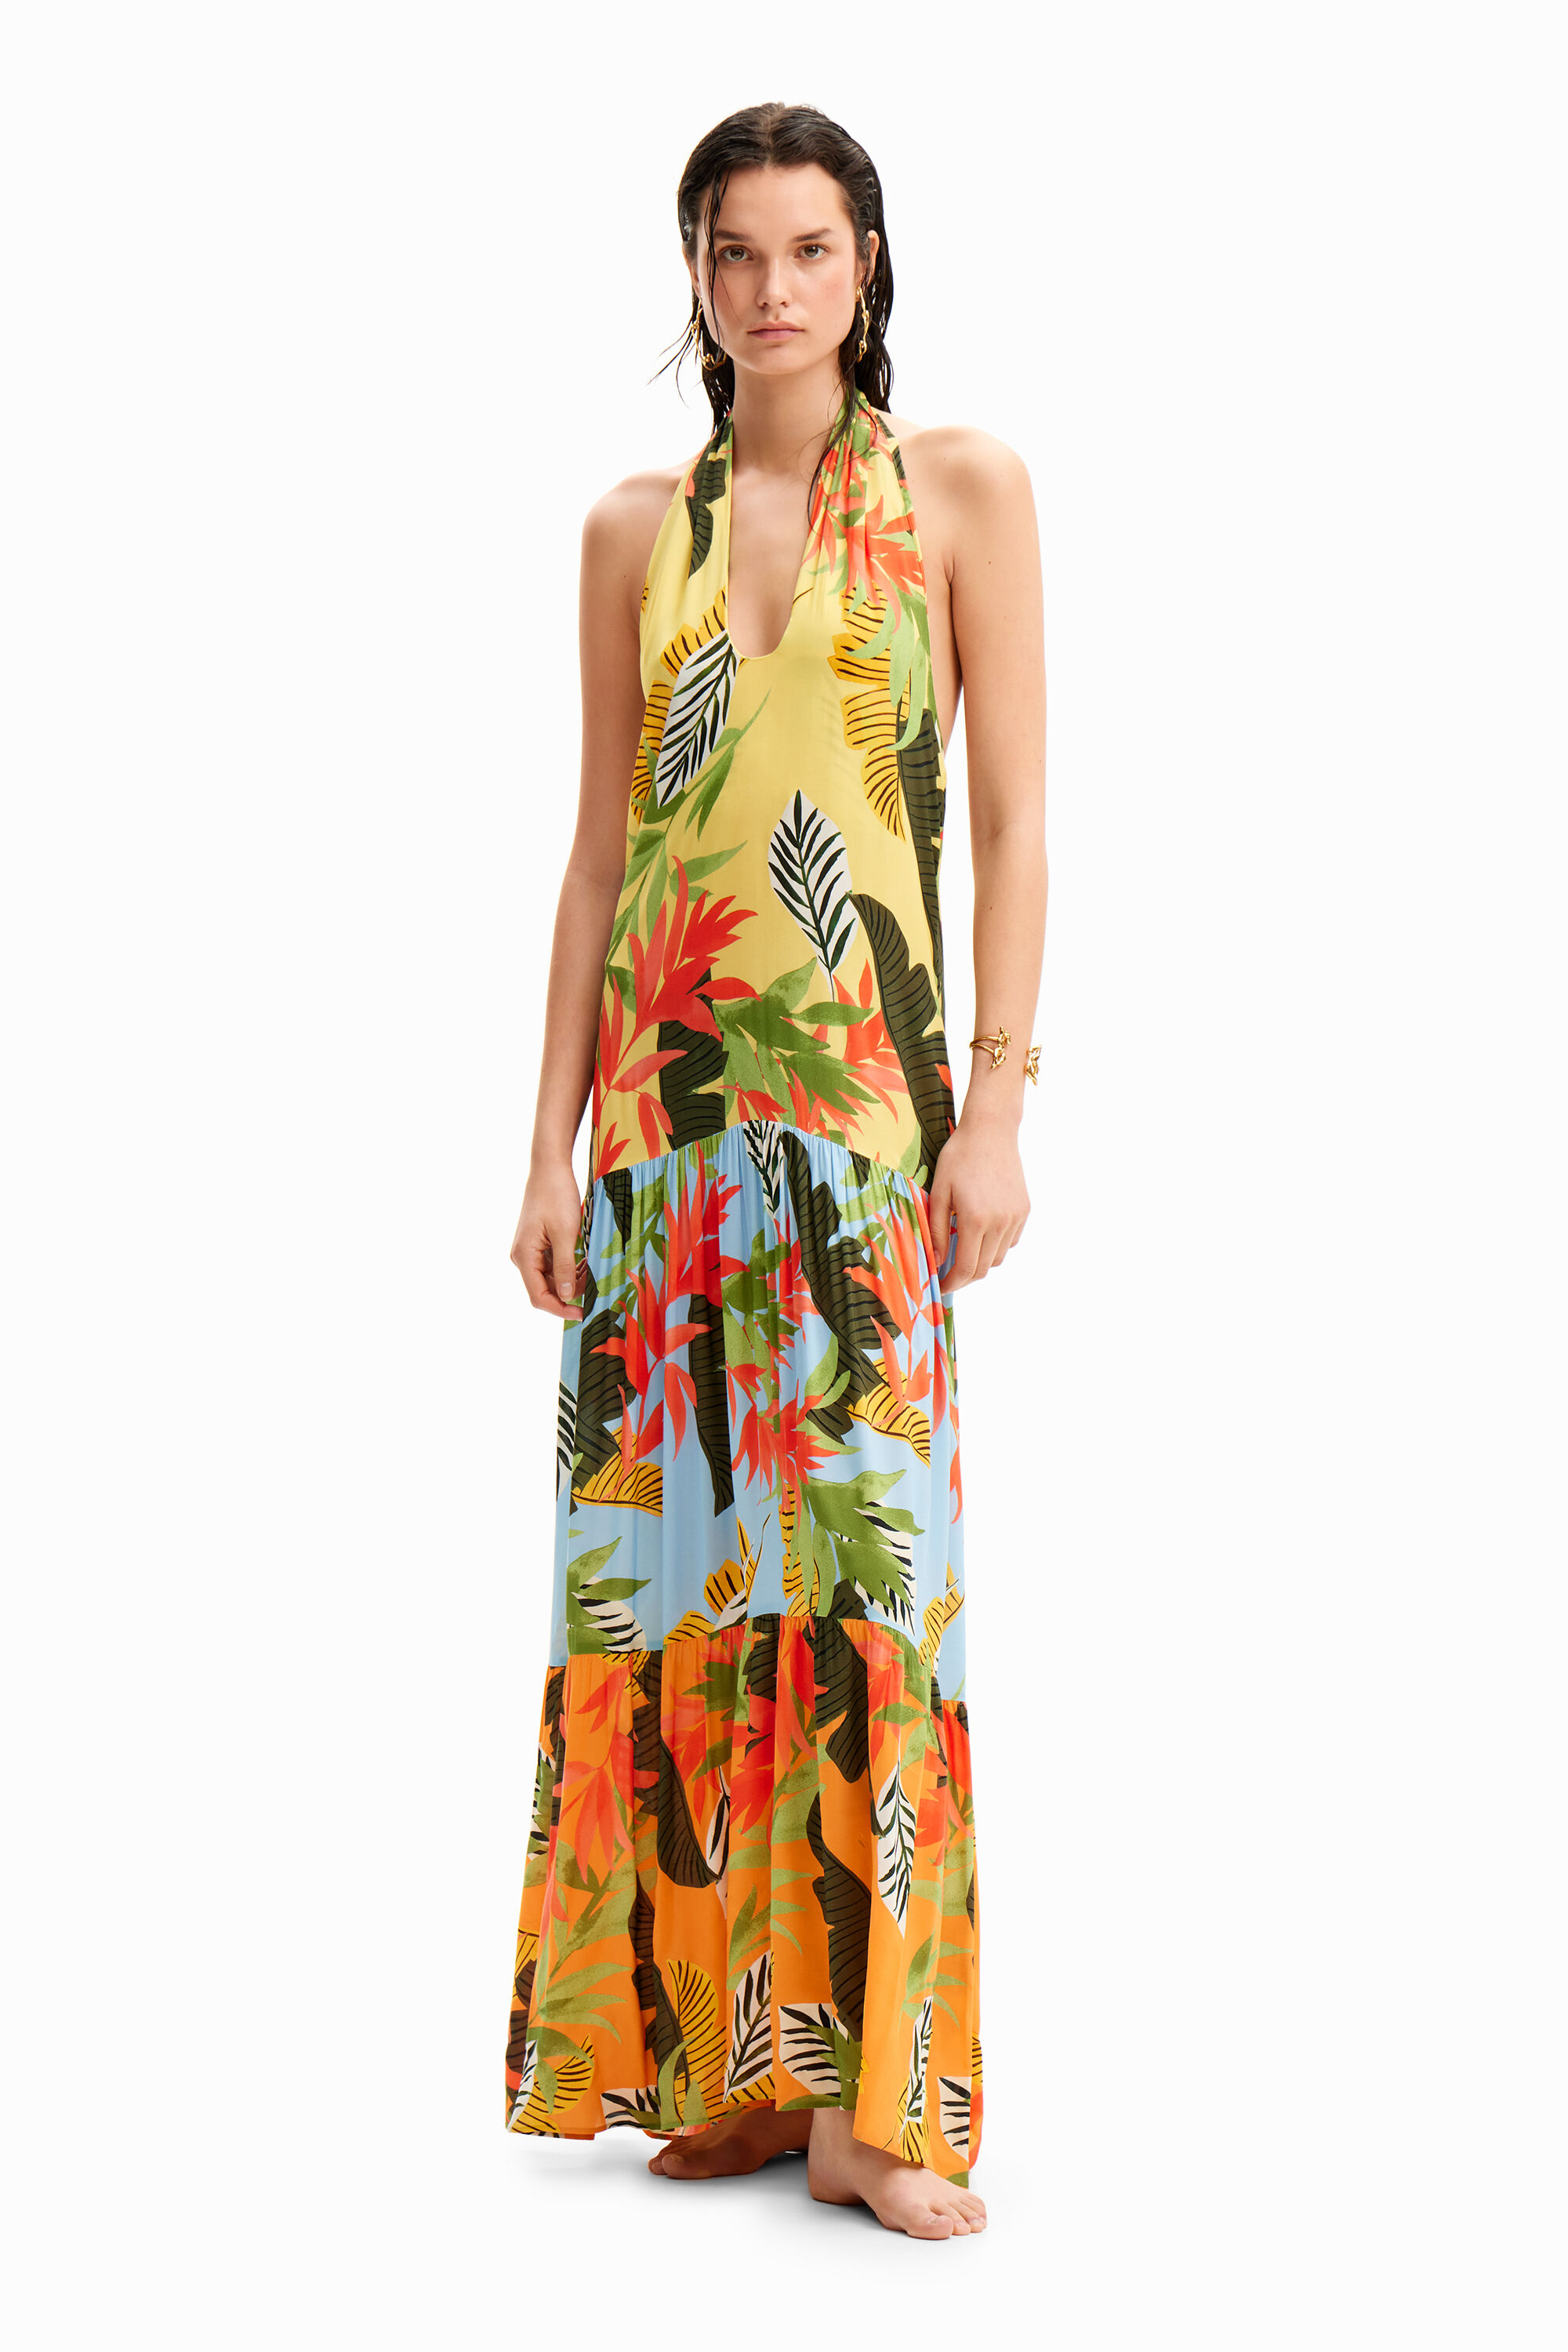 Tropical halter neck maxi dress - MATERIAL FINISHES - L